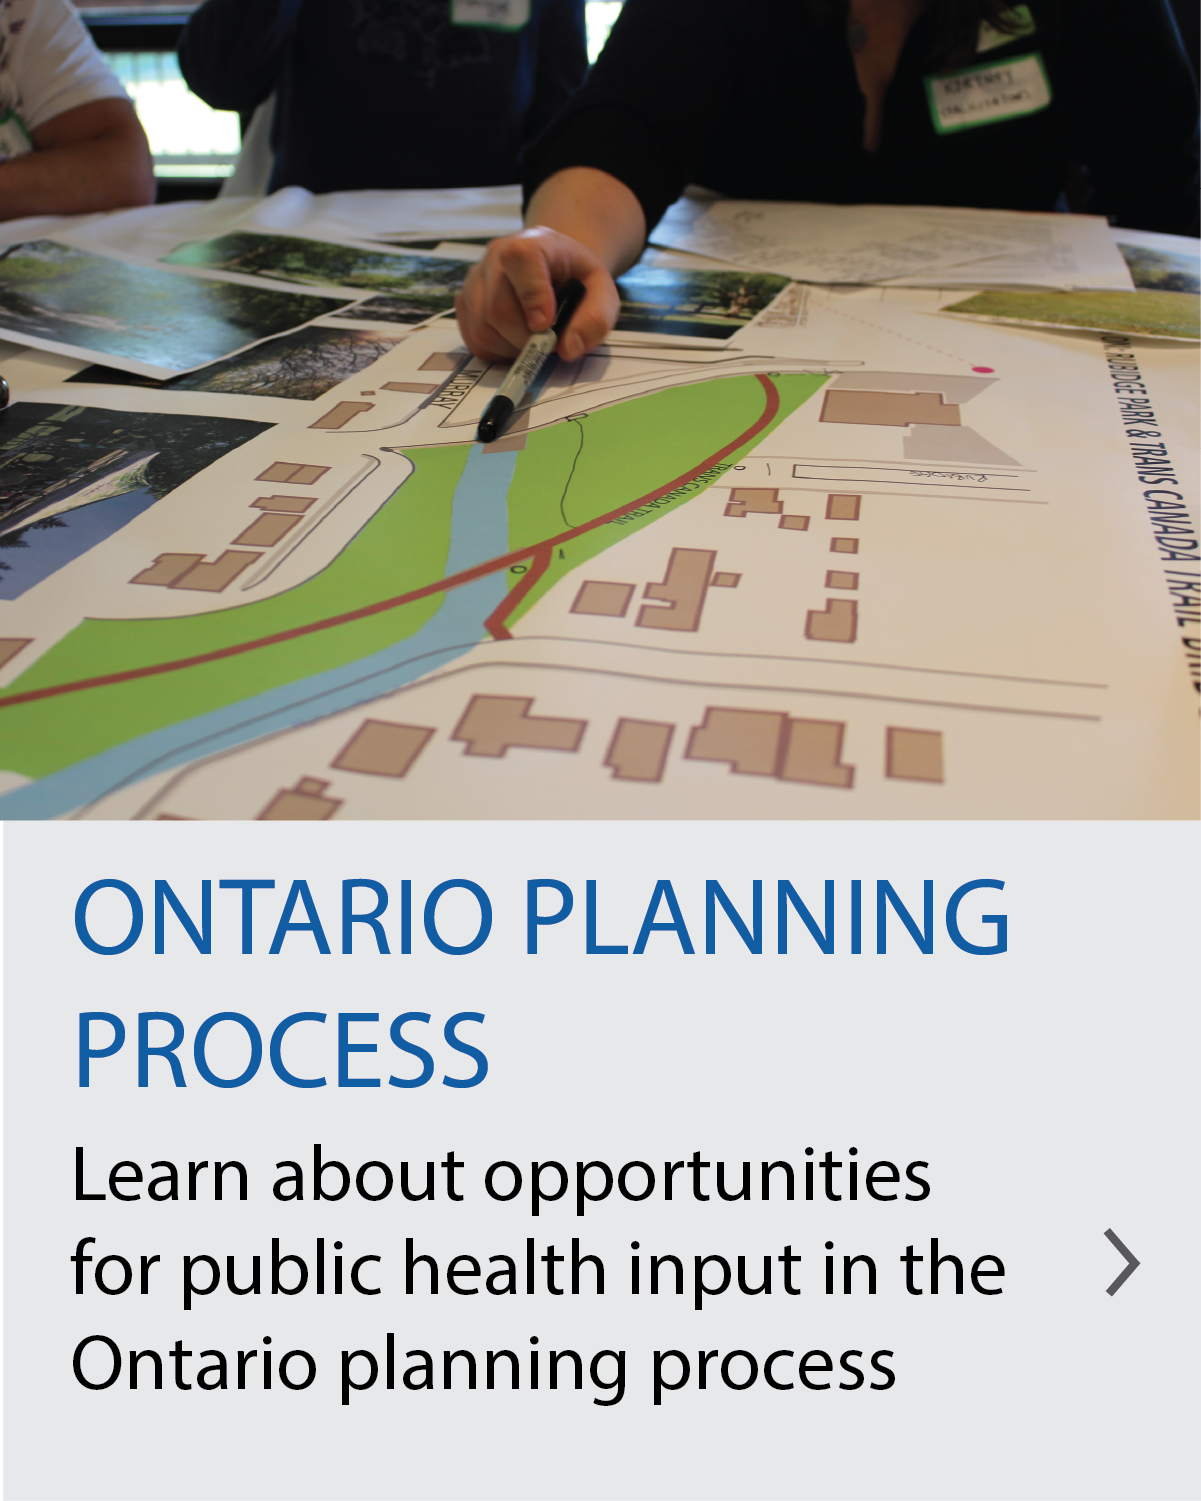 Learn about opportunities for public health input in the Ontario Planning Process